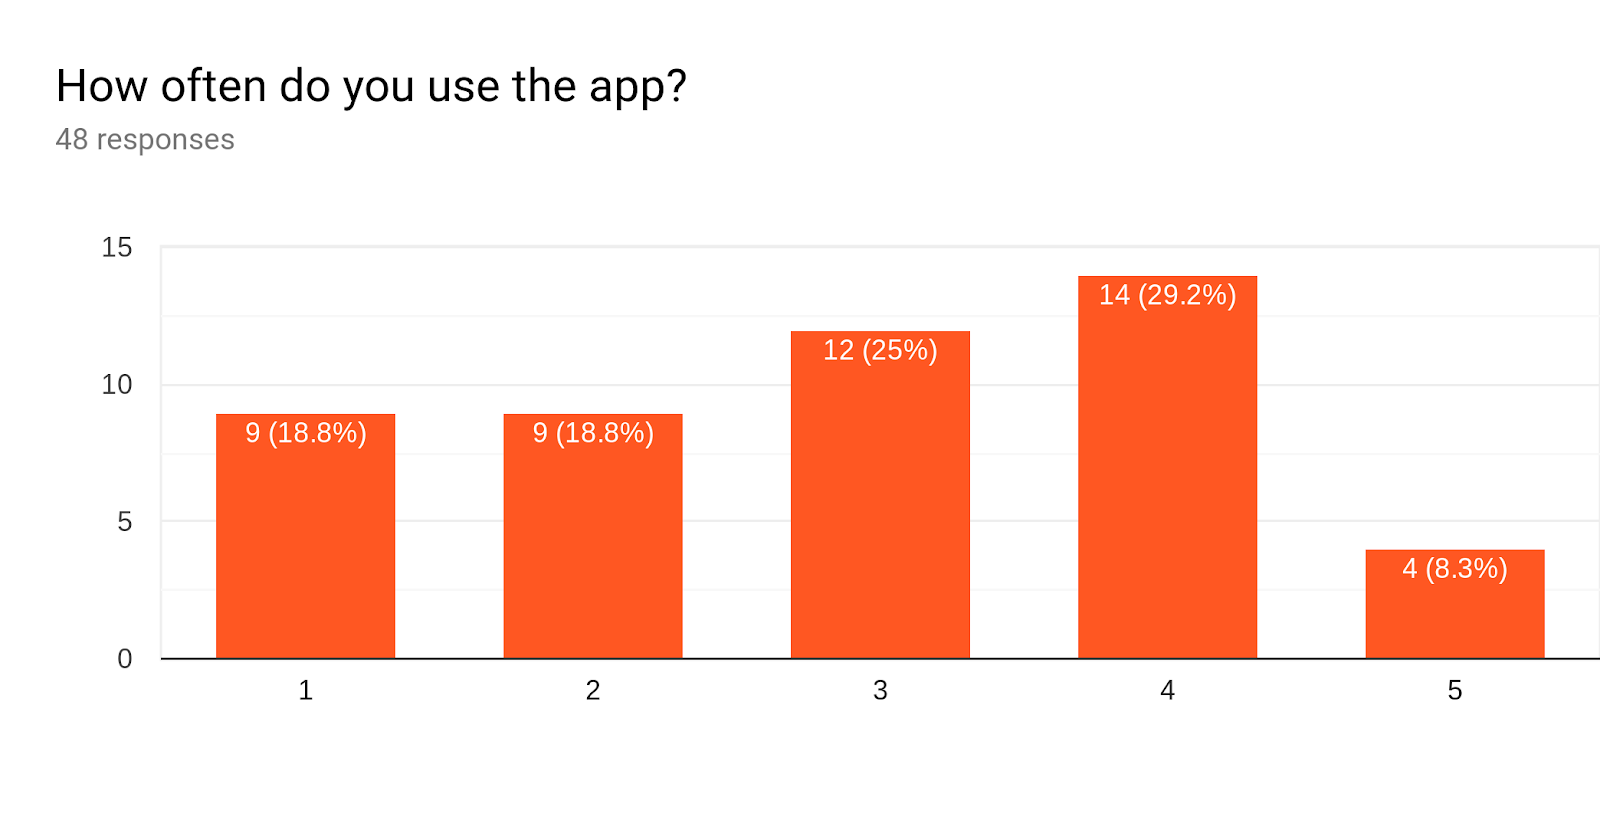 Forms response chart. Question title: How often do you use the app? . Number of responses: 48 responses.